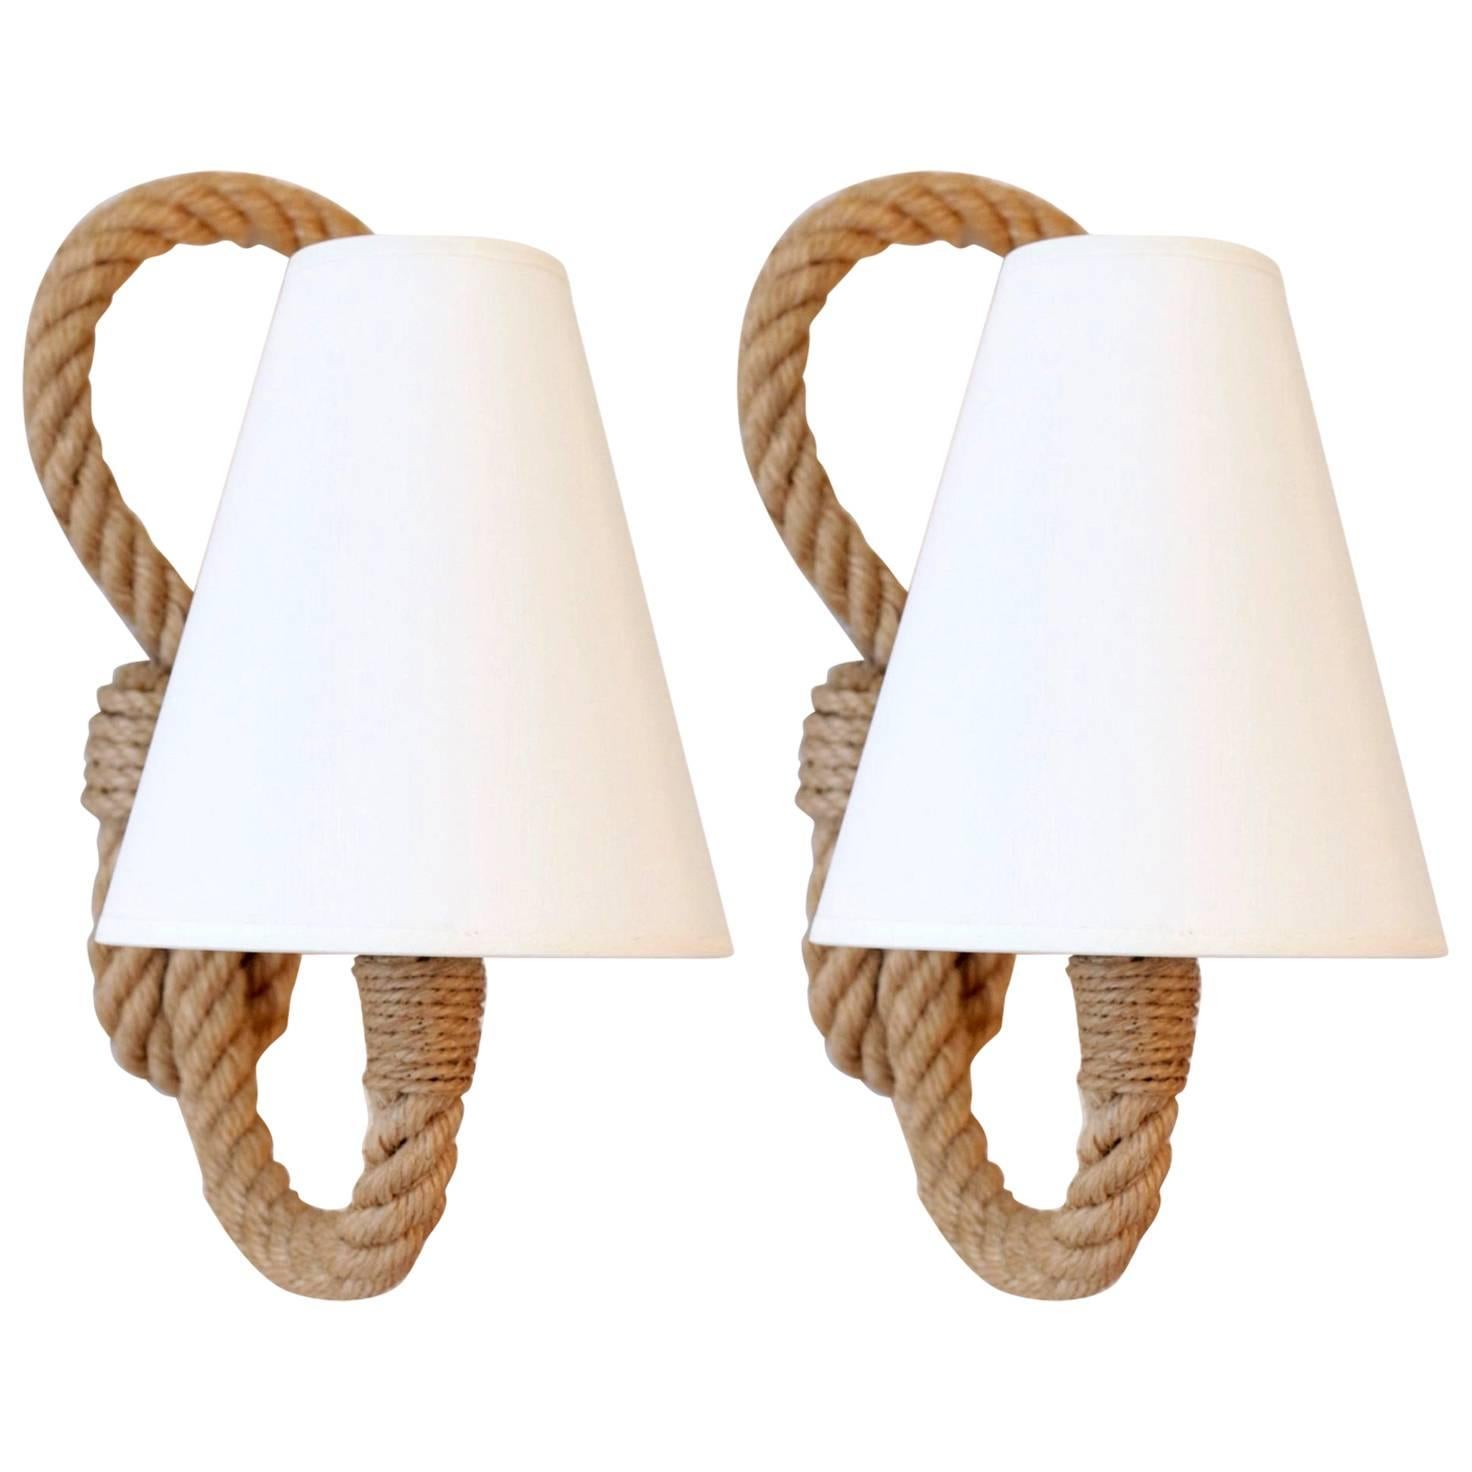 1950 Audoux & Minet Pair of Rope Sconce